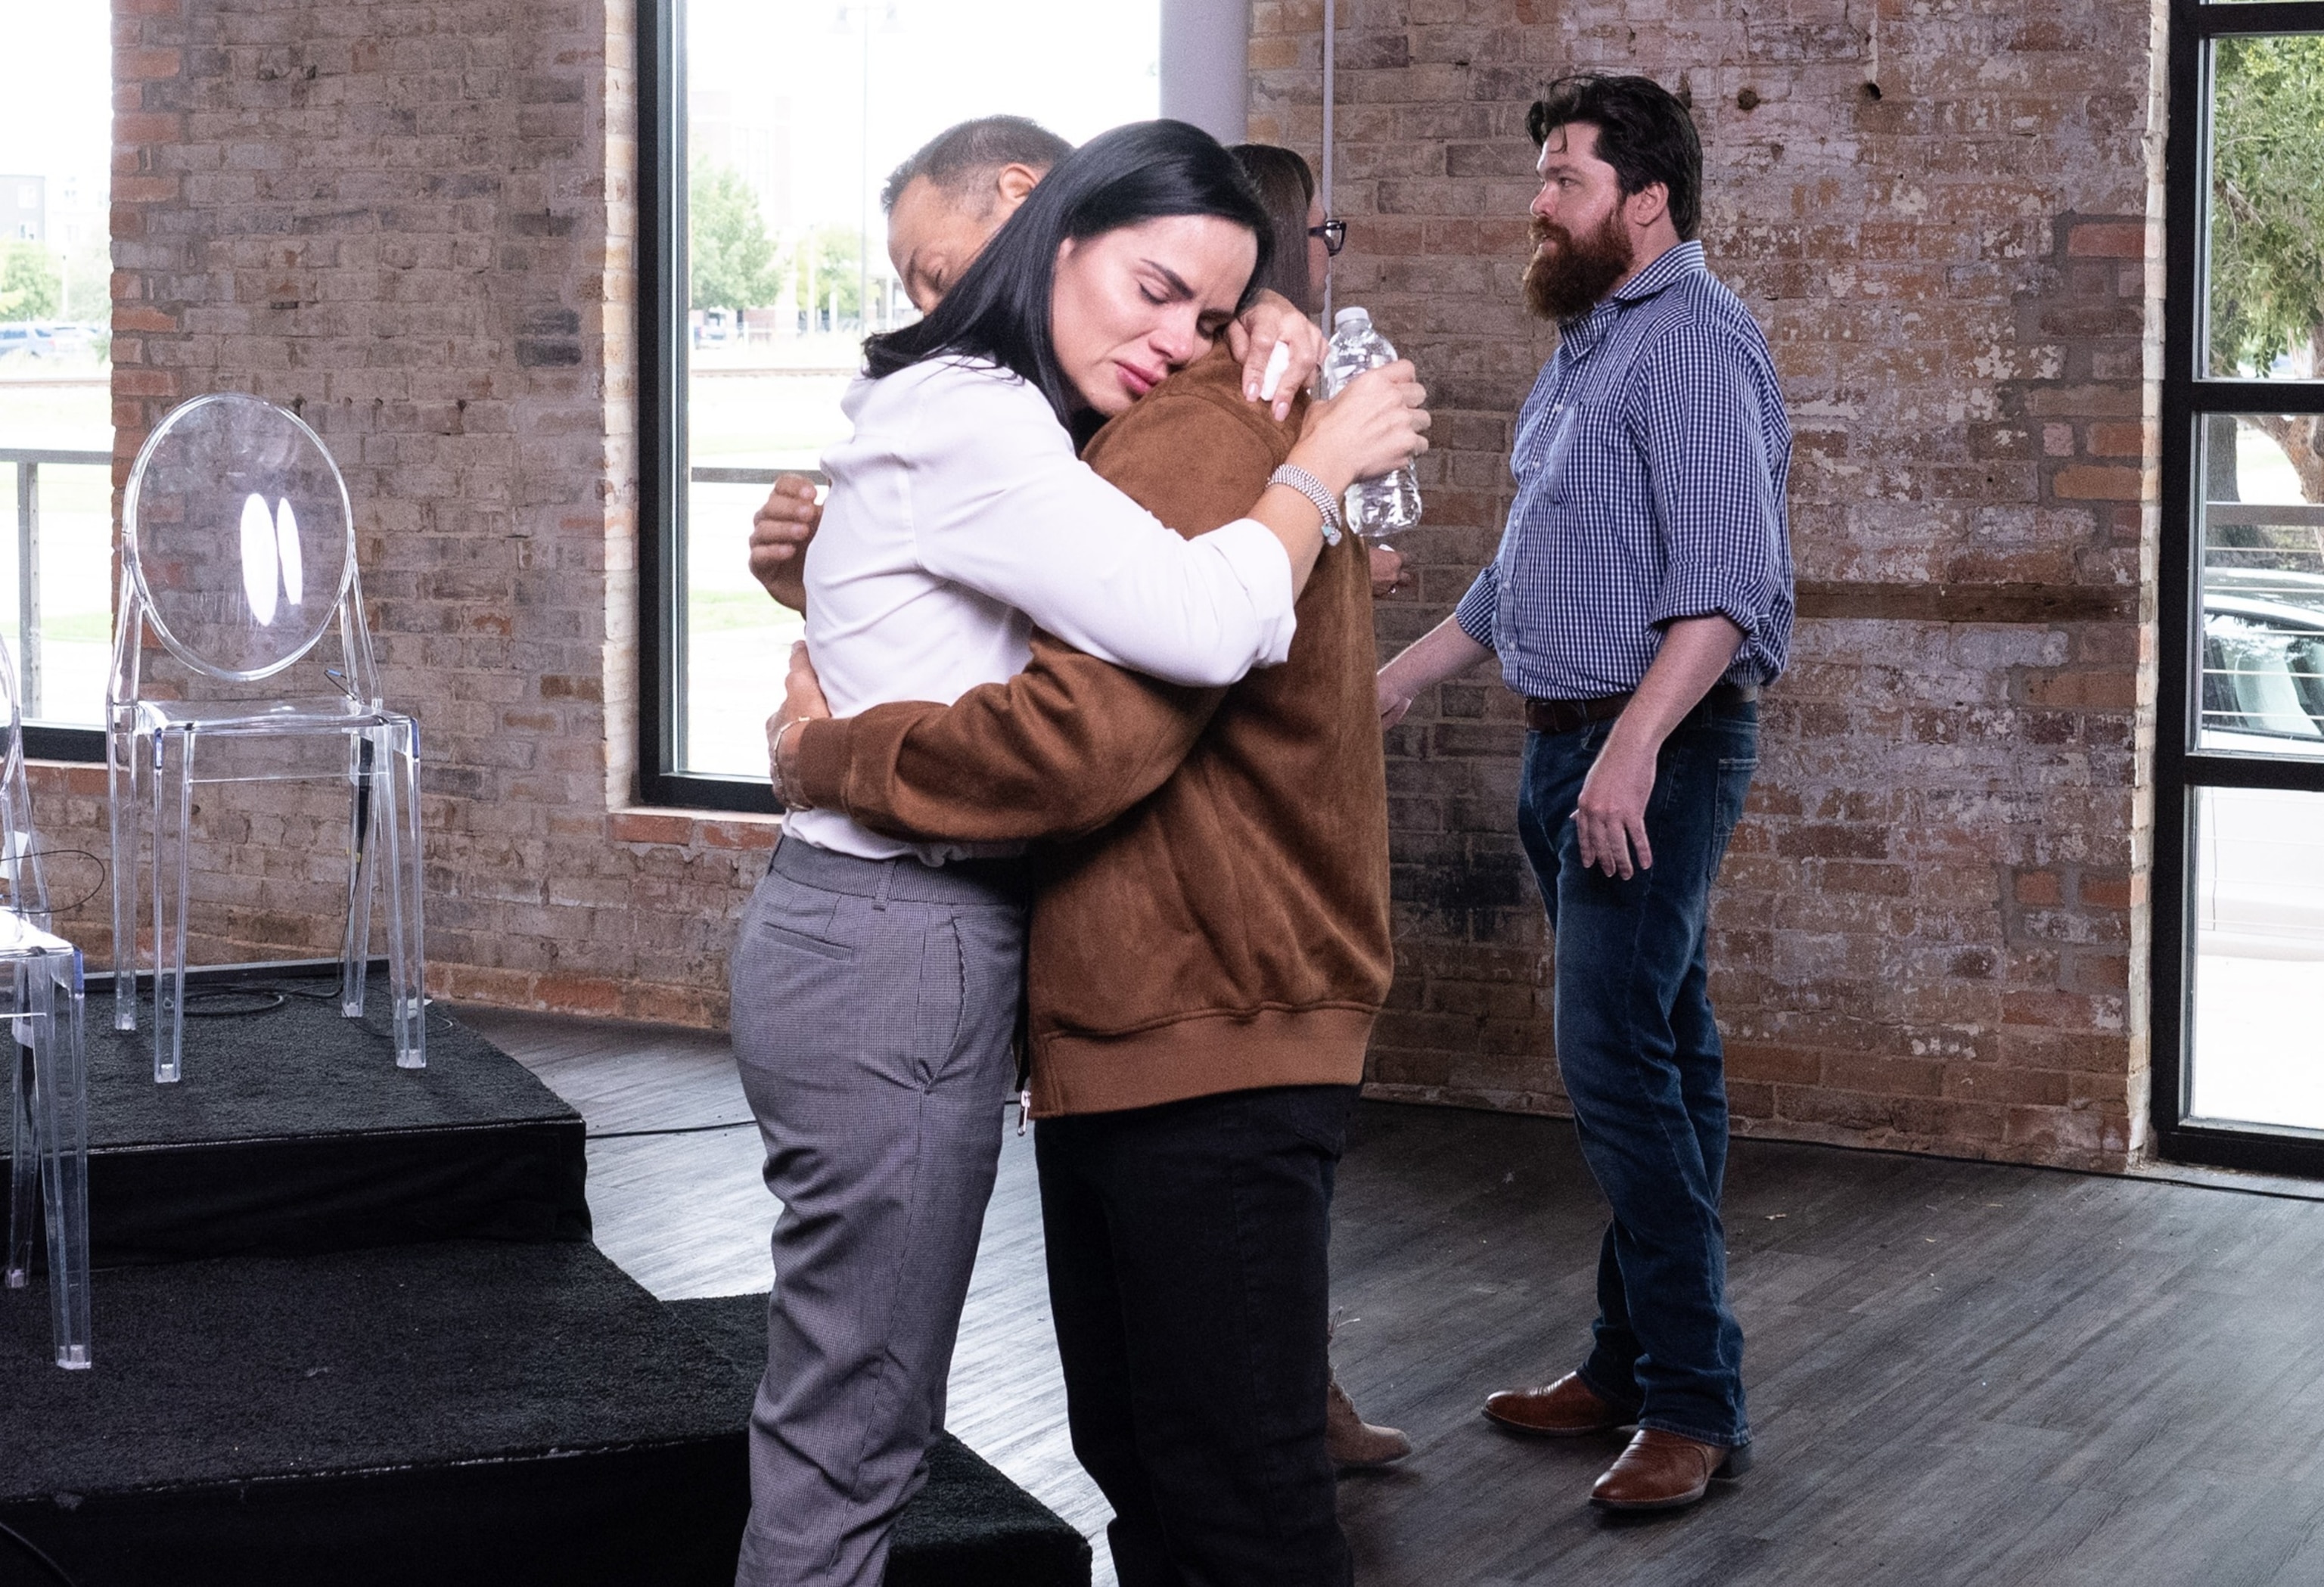 PHOTO: Anabely Lopes and her husband embrace after 18 women sit down with Diane Sawyer and Rachel Scott for an emotional interview.